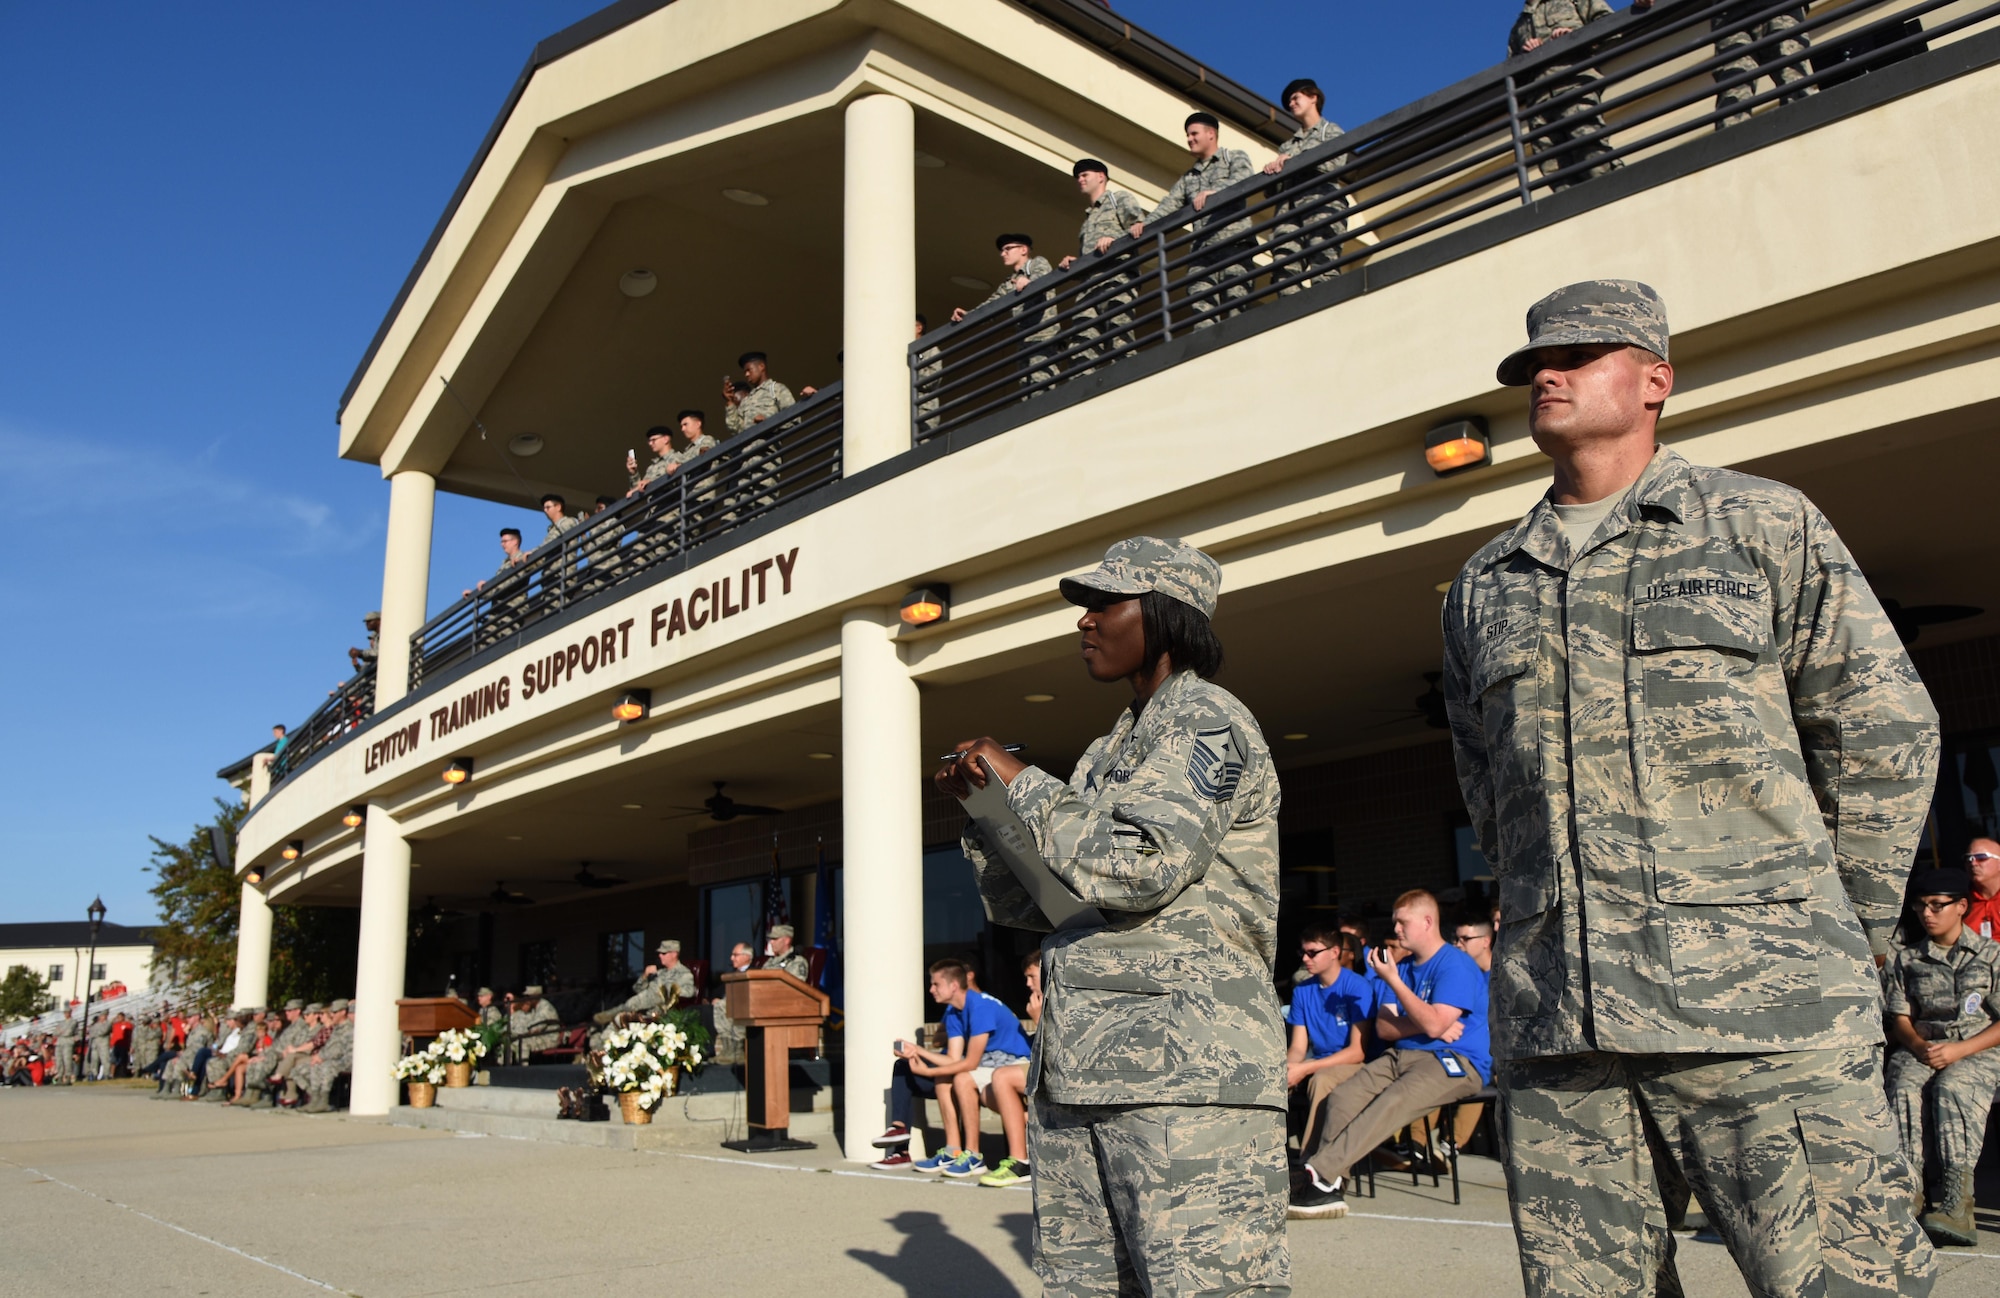 Master Sgt. Audrey McCoy, 81st Diagnostic and Therapeutics Squadron first sergeant, serves as a judge while Airman Basic Scott Stip, 338th Training Squadron student, stands by during the 81st Training Group drill down at the Levitow Training Support Facility drill pad Nov. 4, 2016, on Keesler Air Force Base, Miss. The quarterly drill down featured an open ranks inspection, regulation drill routine and freestyle drill routine categories. The 81st TRG’s four non-prior service training squadrons competed in the competition, with the 334th TRS “Gators” taking home the overall first place. (U.S. Air Force photo by Kemberly Groue/Released)